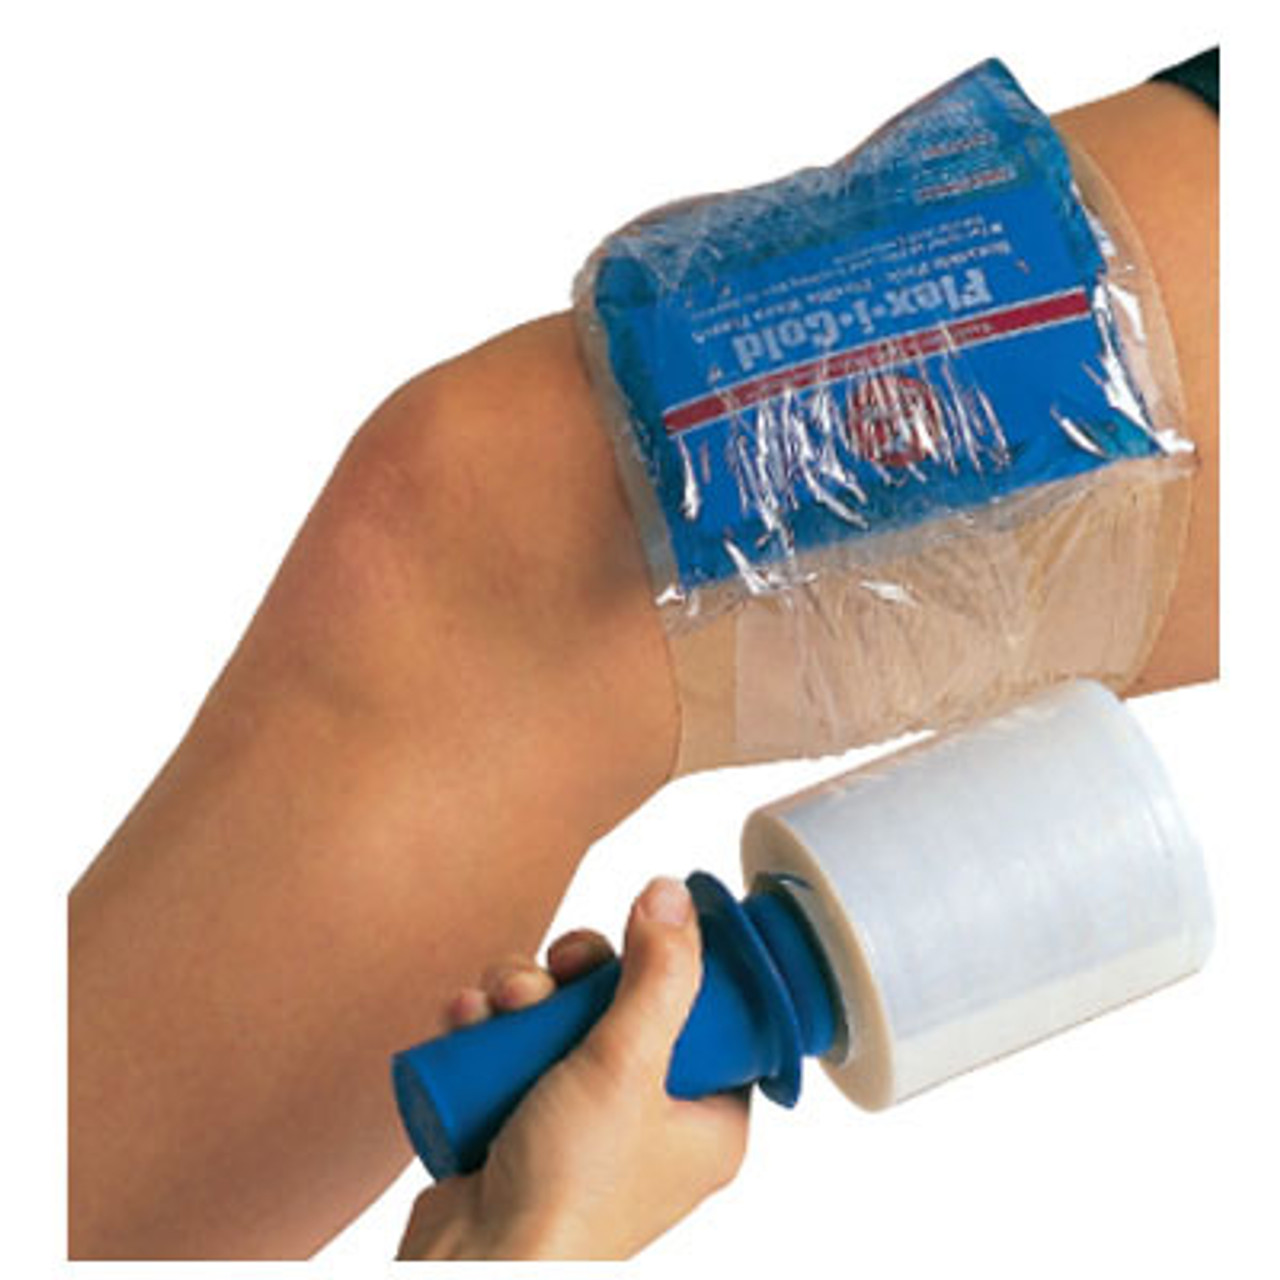 For relief of Pain and Swelling Due to Sprains, Strains and Contusions